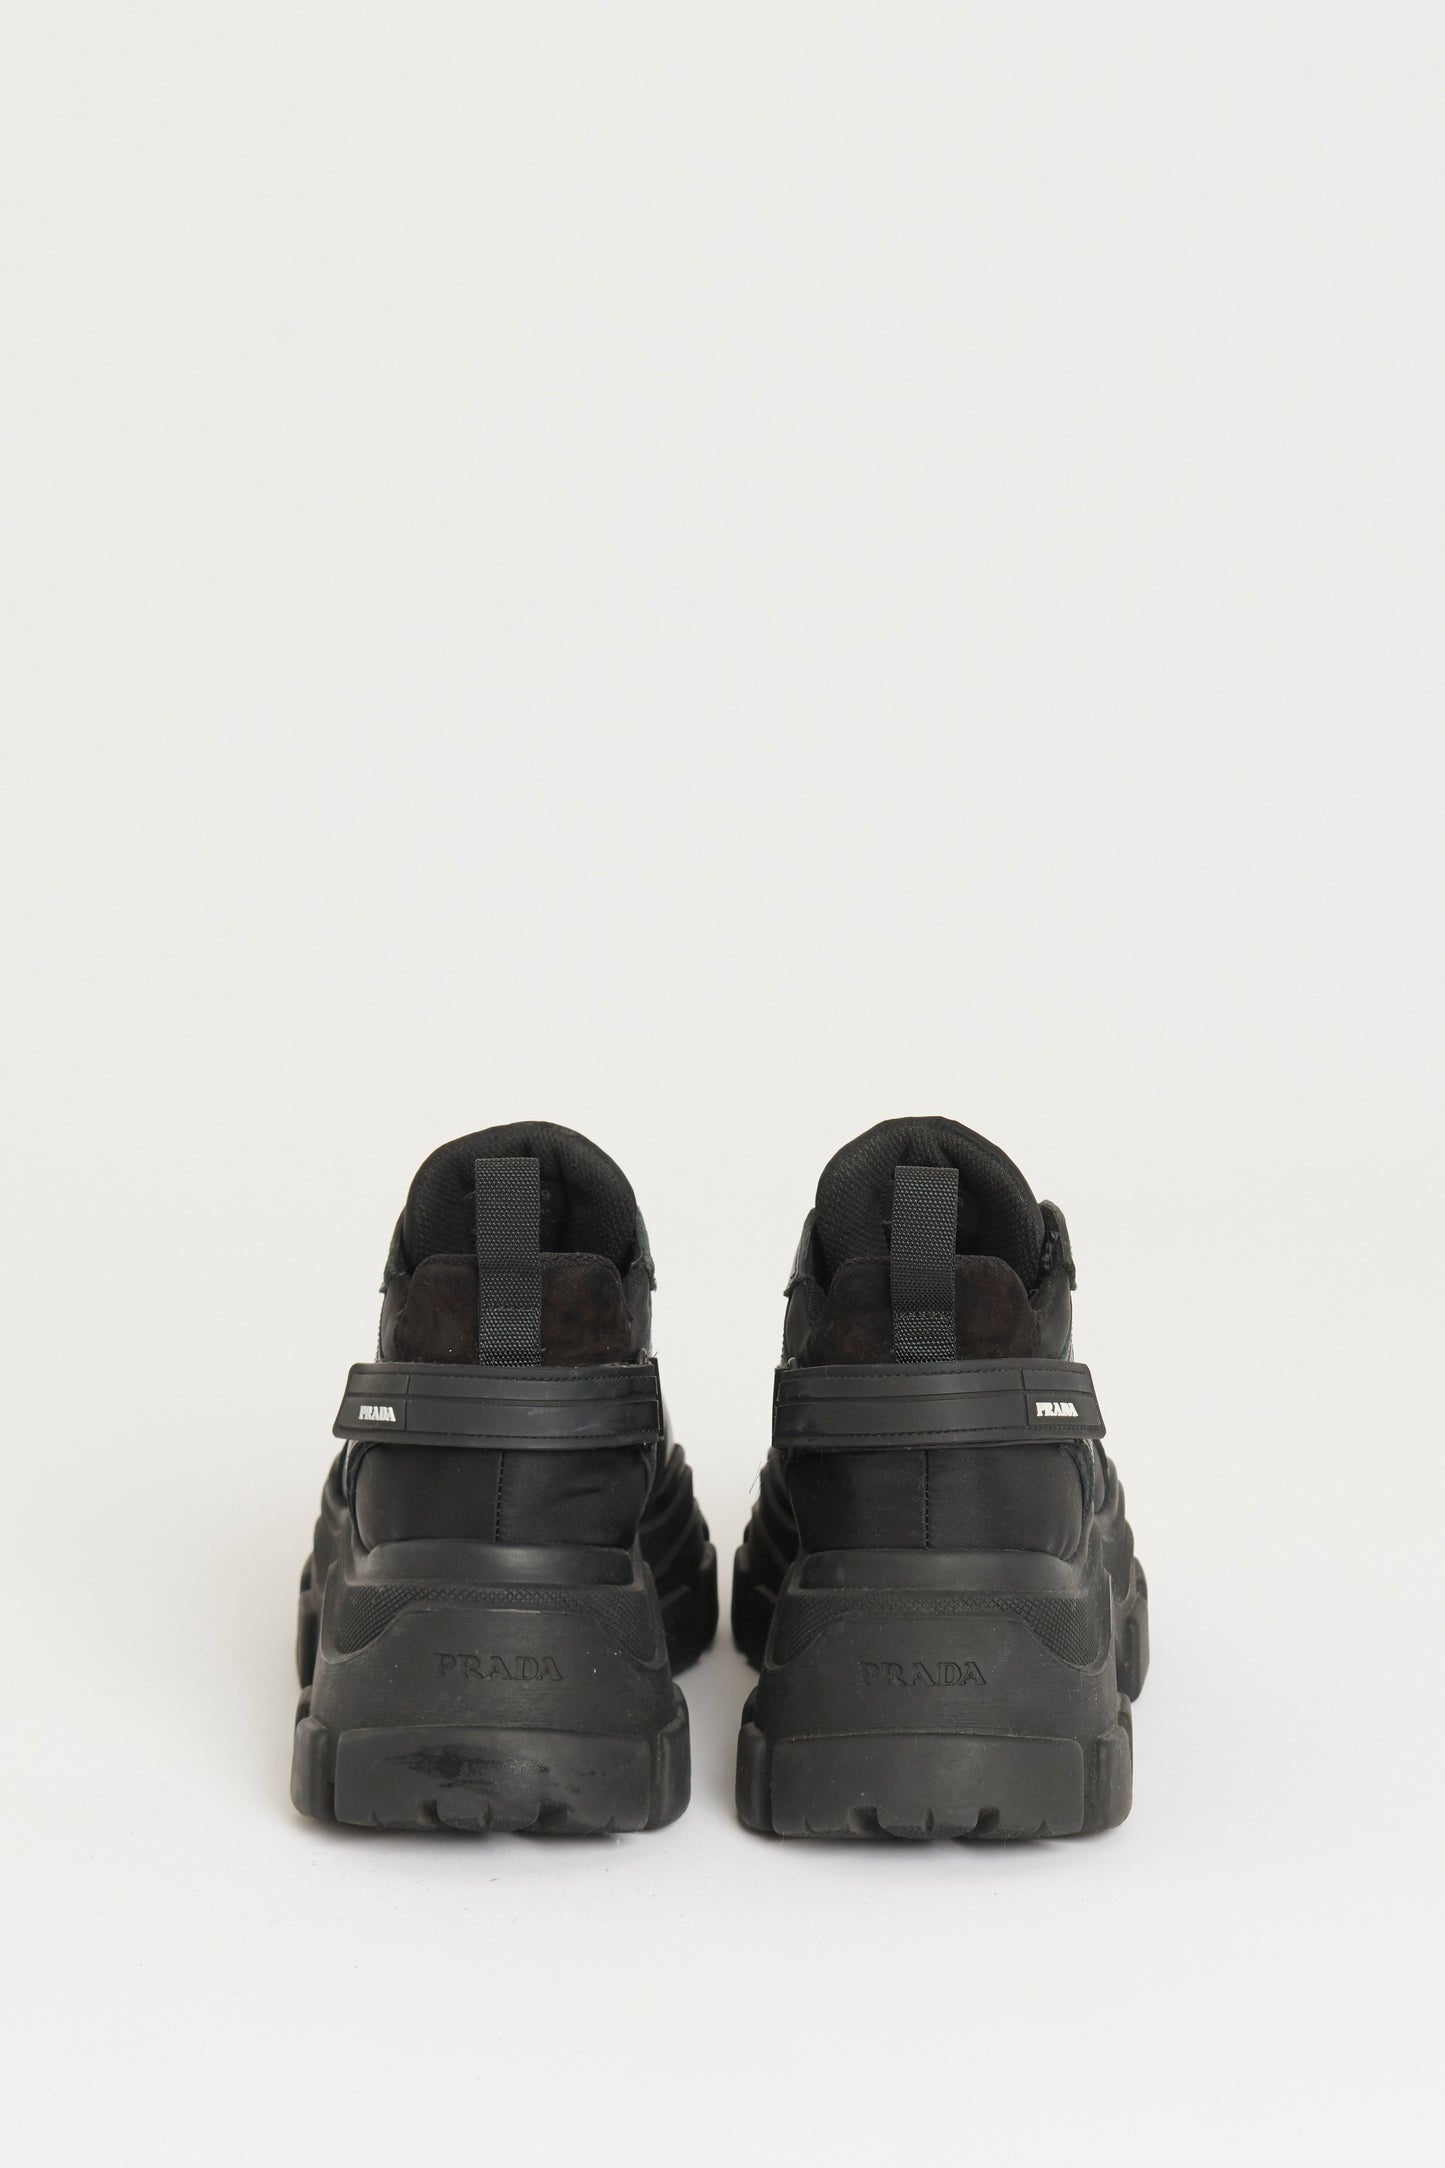 Black Leather Preowned Centaurus Sneakers